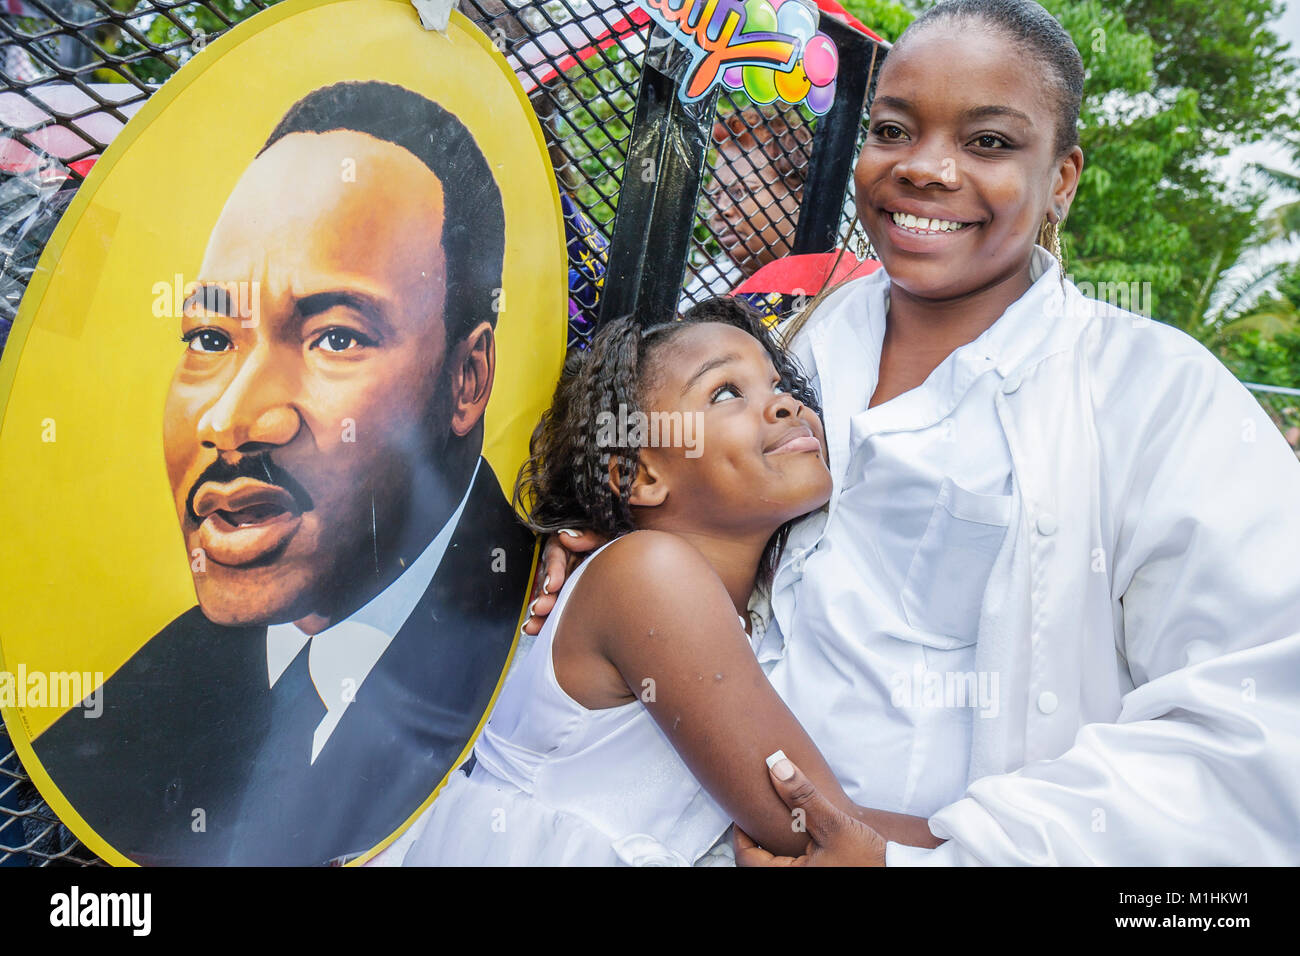 Miami Florida,Liberty City,Martin Luther King Jr. Parade,participant,community event,Black Blacks African Africans ethnic minority,girl girls,youngste Stock Photo